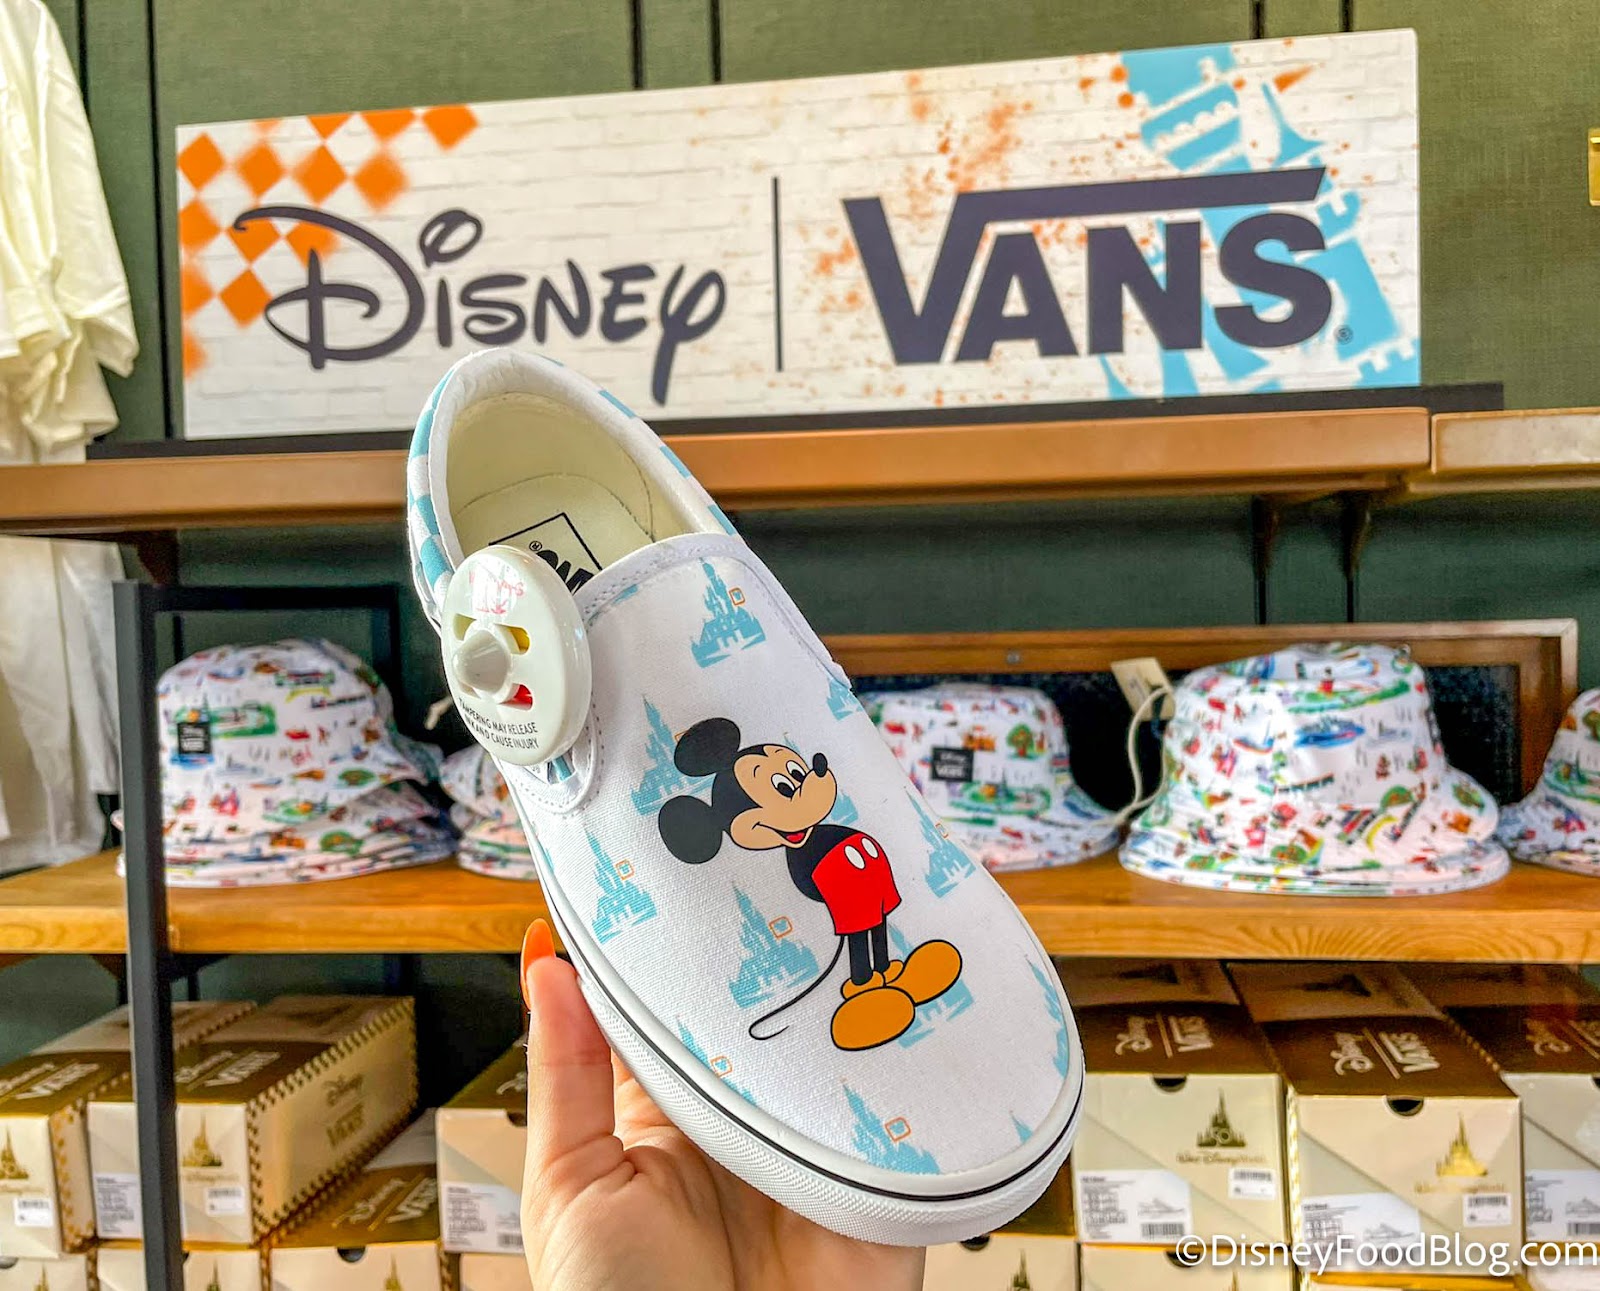 Vans x Disney collaboration Mickey Mouse print slip-on shoe held in front of display with shoeboxes and Disney Vans signage in the background.